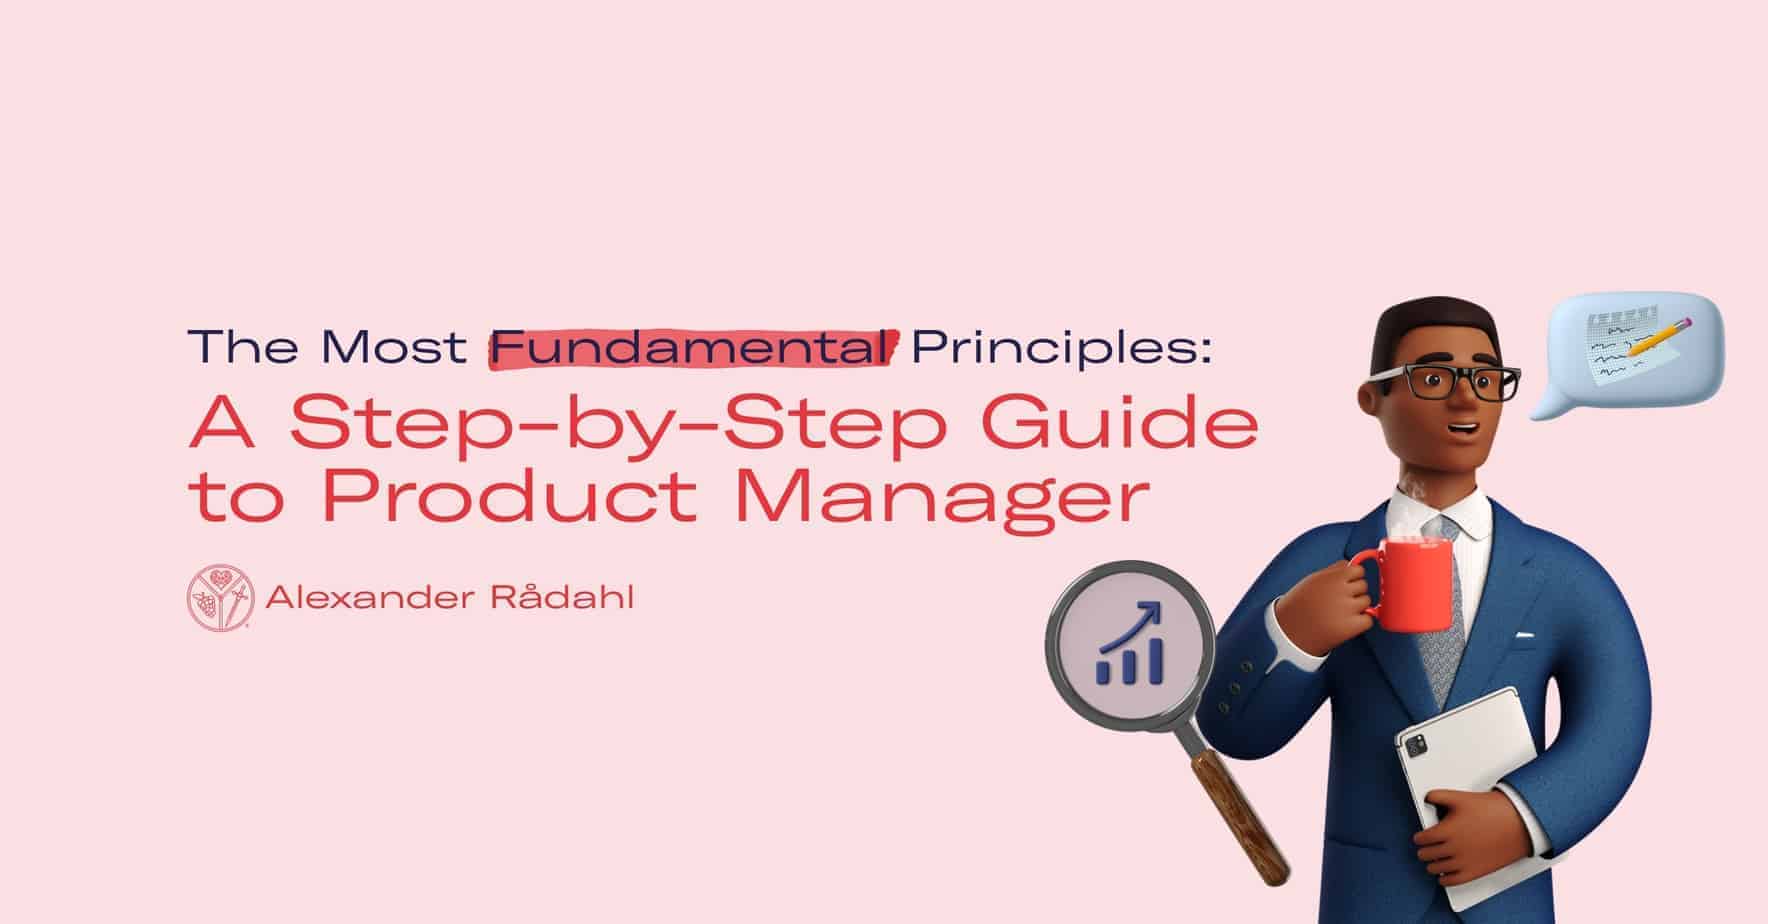 A Step-by-Step Guide to Product Manager: The Most Fundamental Principles